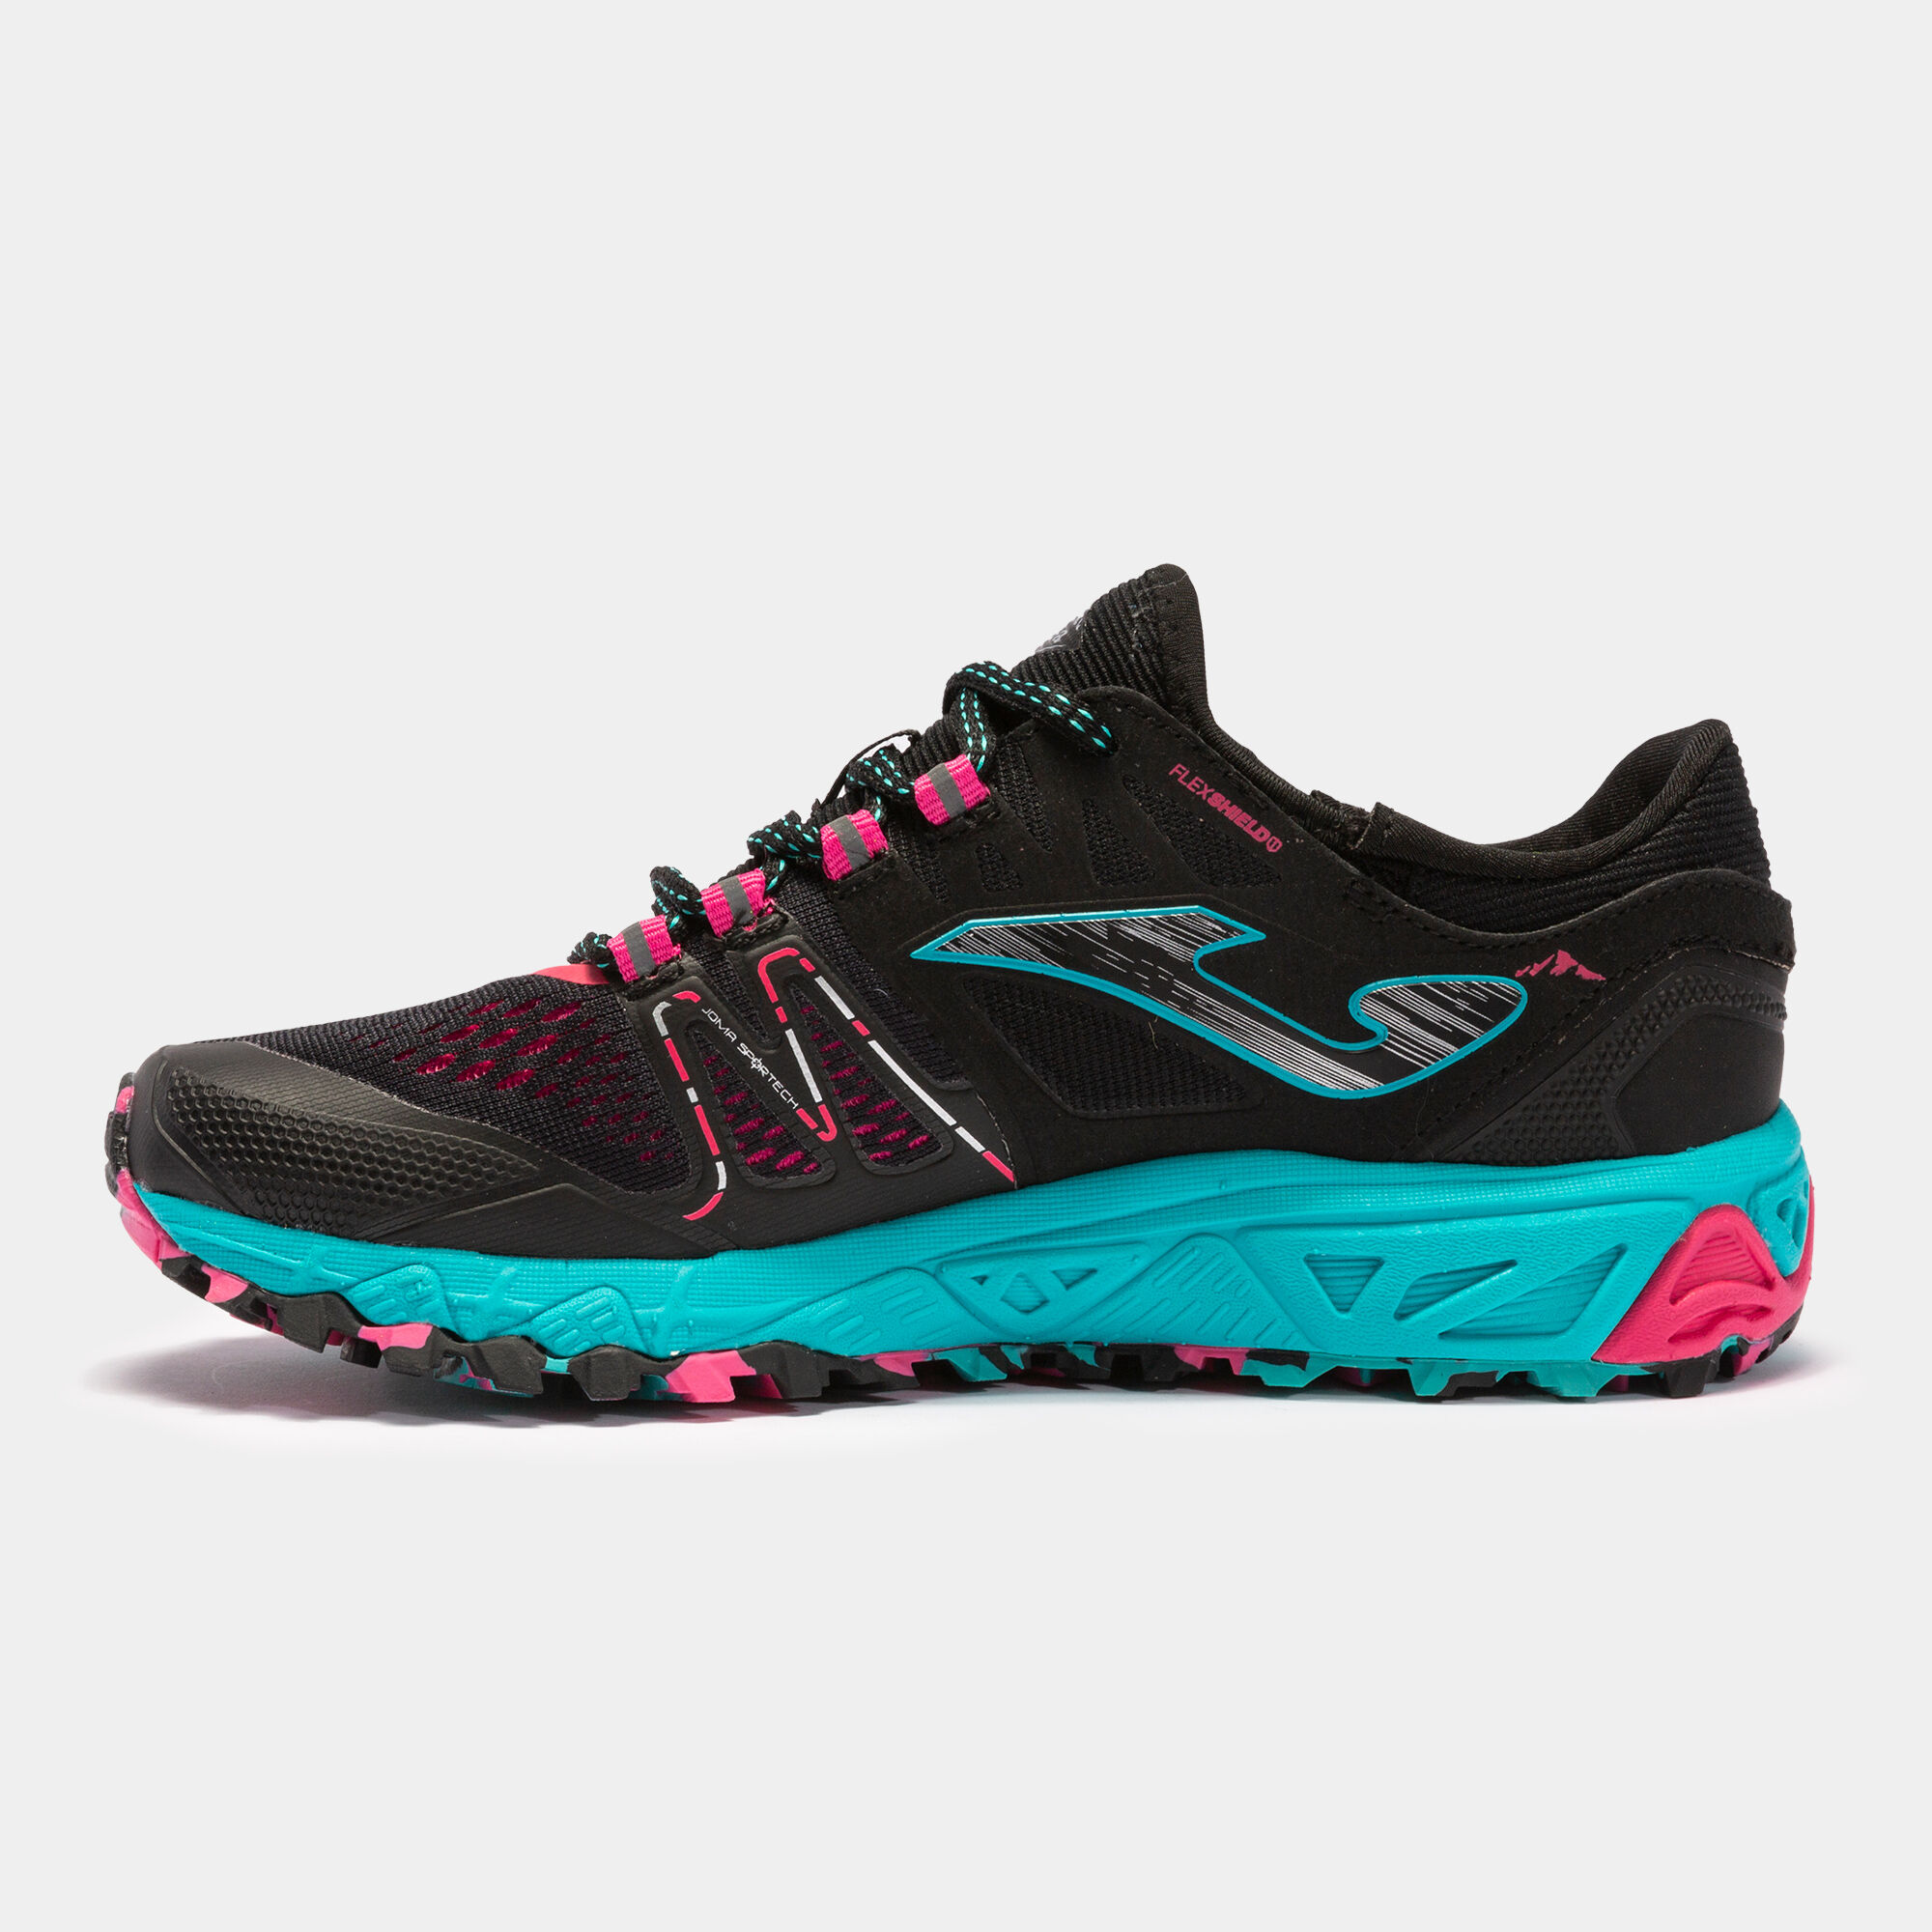 TRAIL-RUNNING SHOES SIERRA 22 WOMAN BLACK TURQUOISE